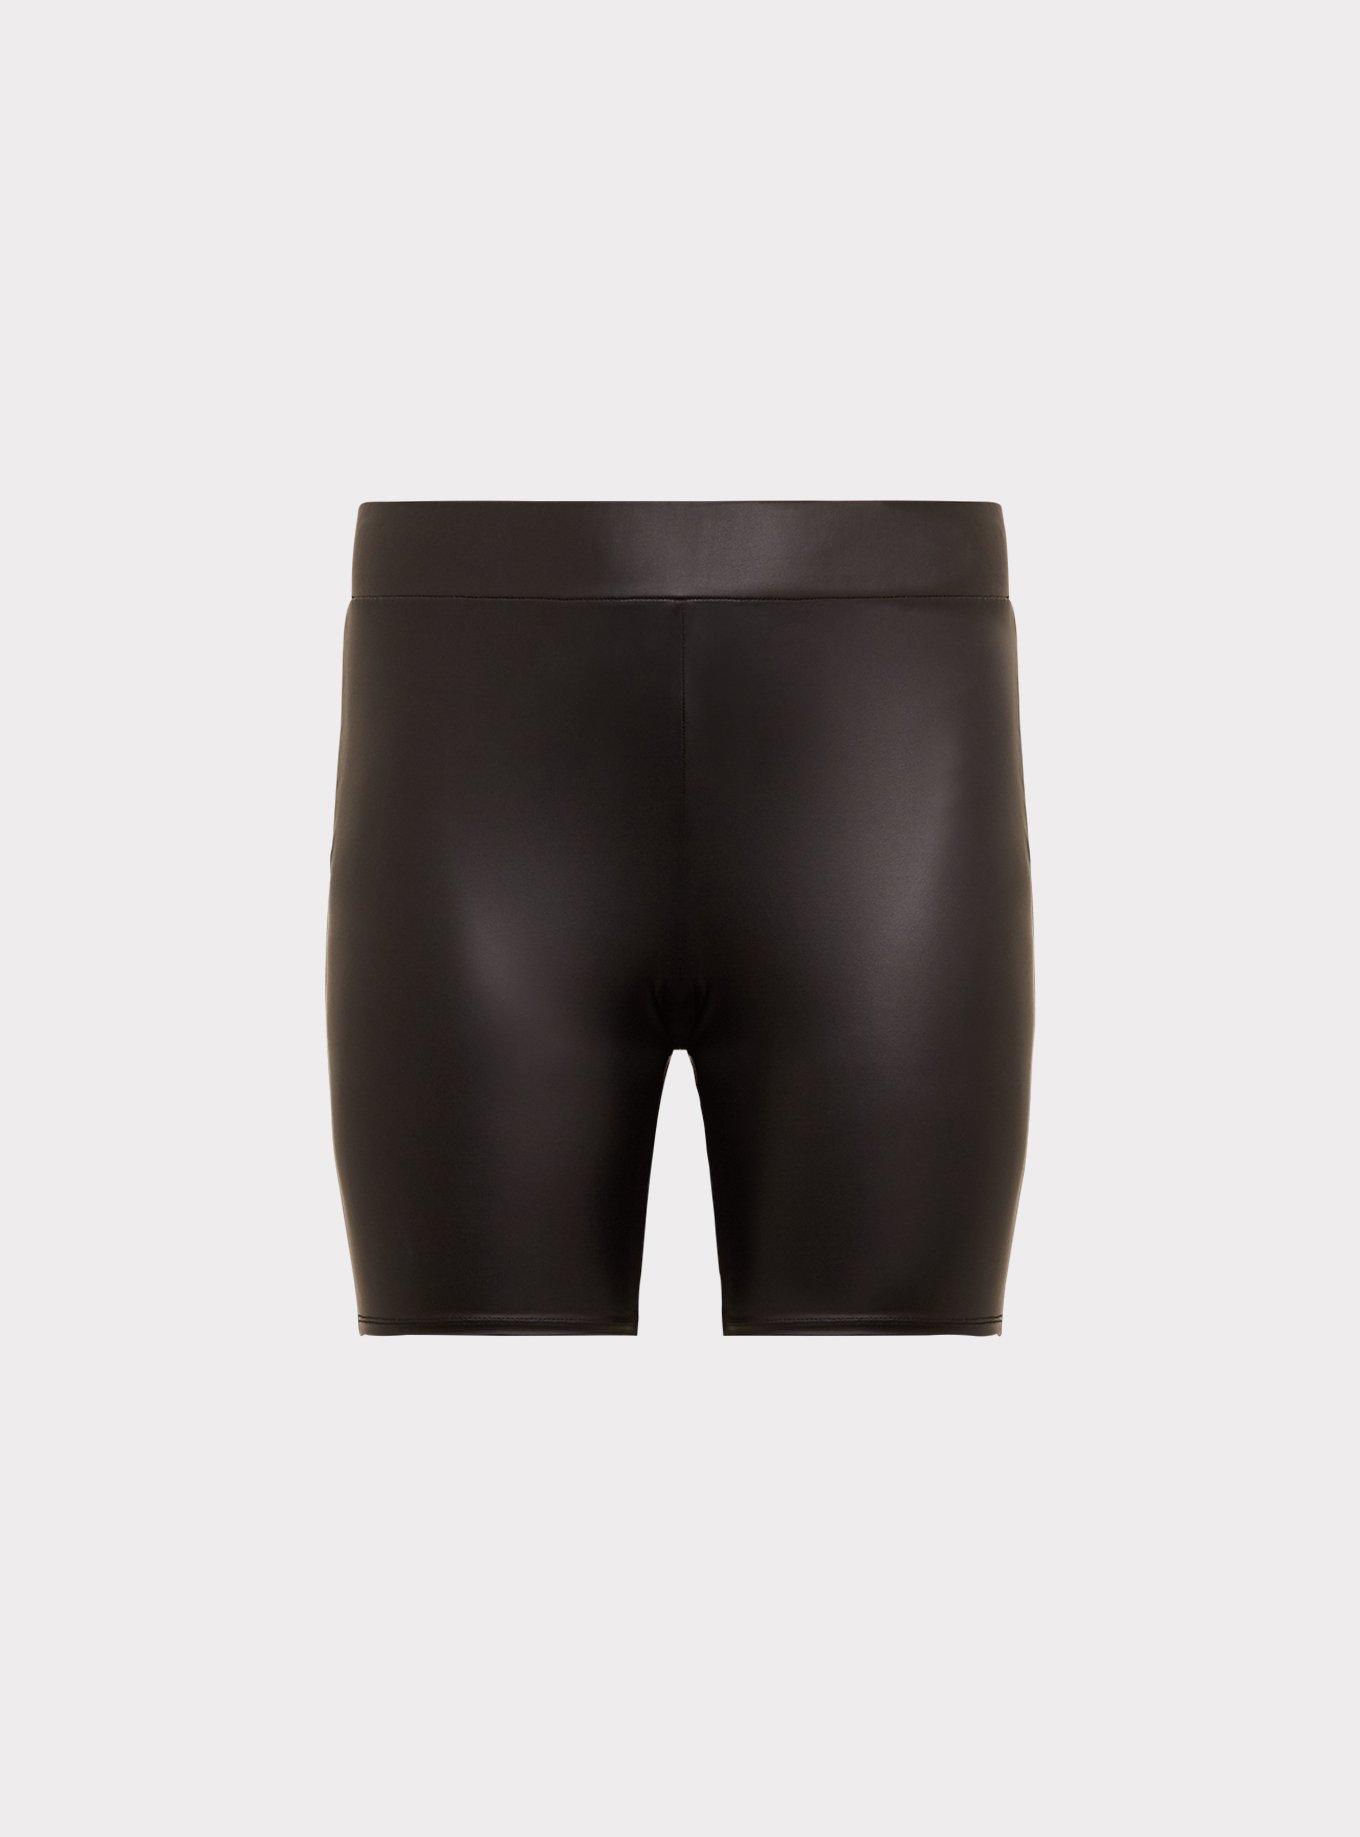 Spanx Faux Leather Bike Shorts Black Size SMALL for sale online